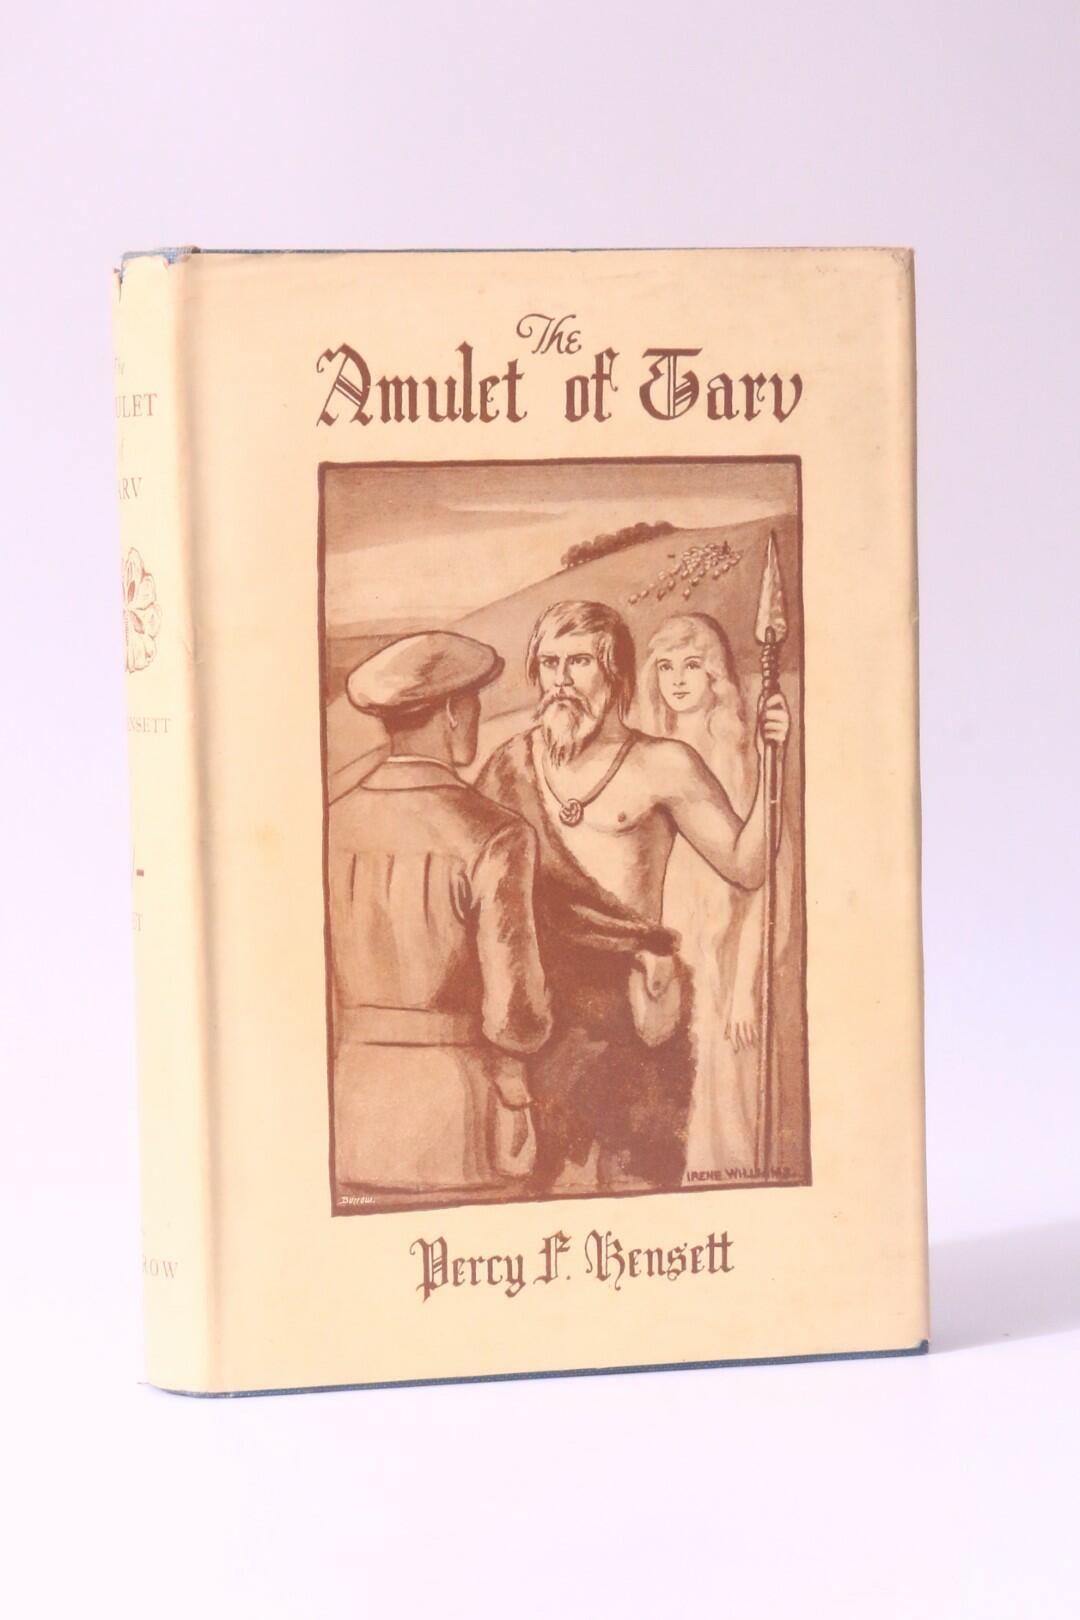 Percy F. Kensett - The Amulet of Tarv - Ed. J. Burrow, 1925, Signed First Edition.